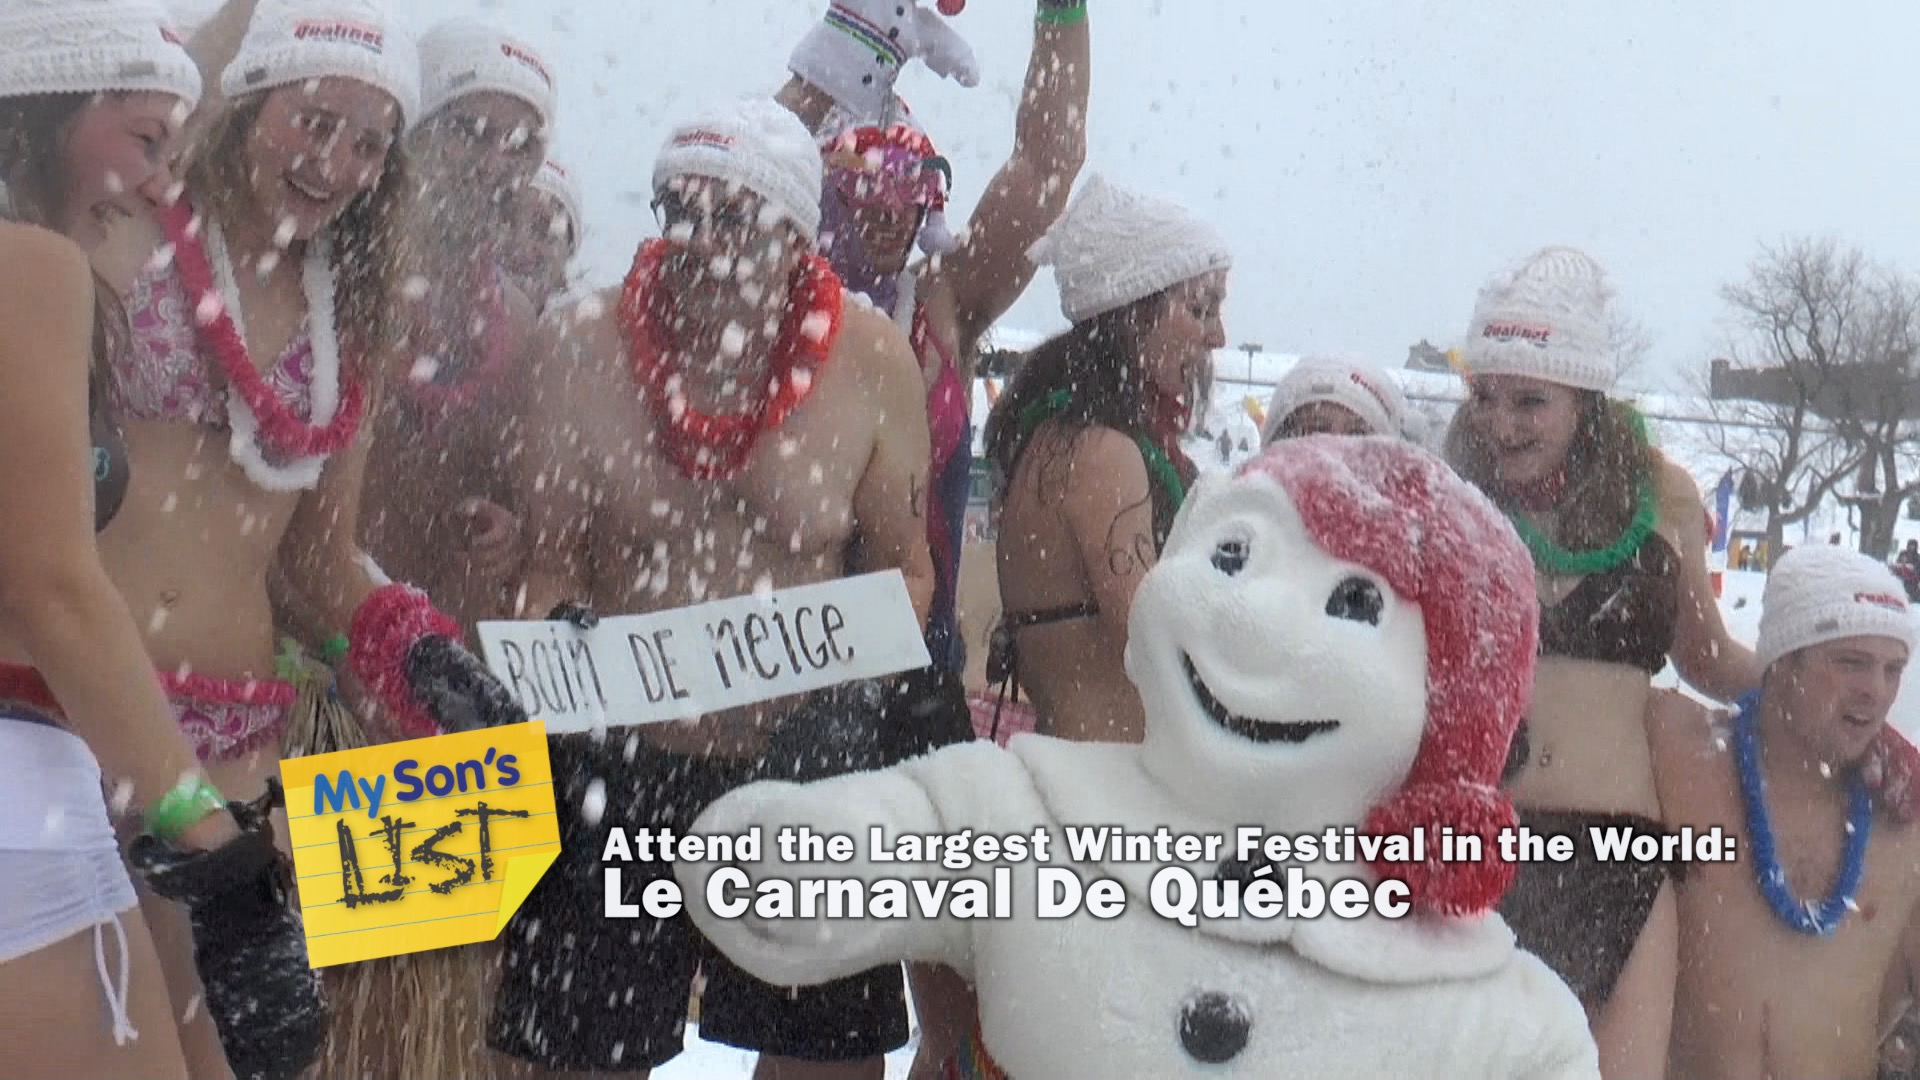 Carnaval De Quebec: The Largest Winter Festival in the World